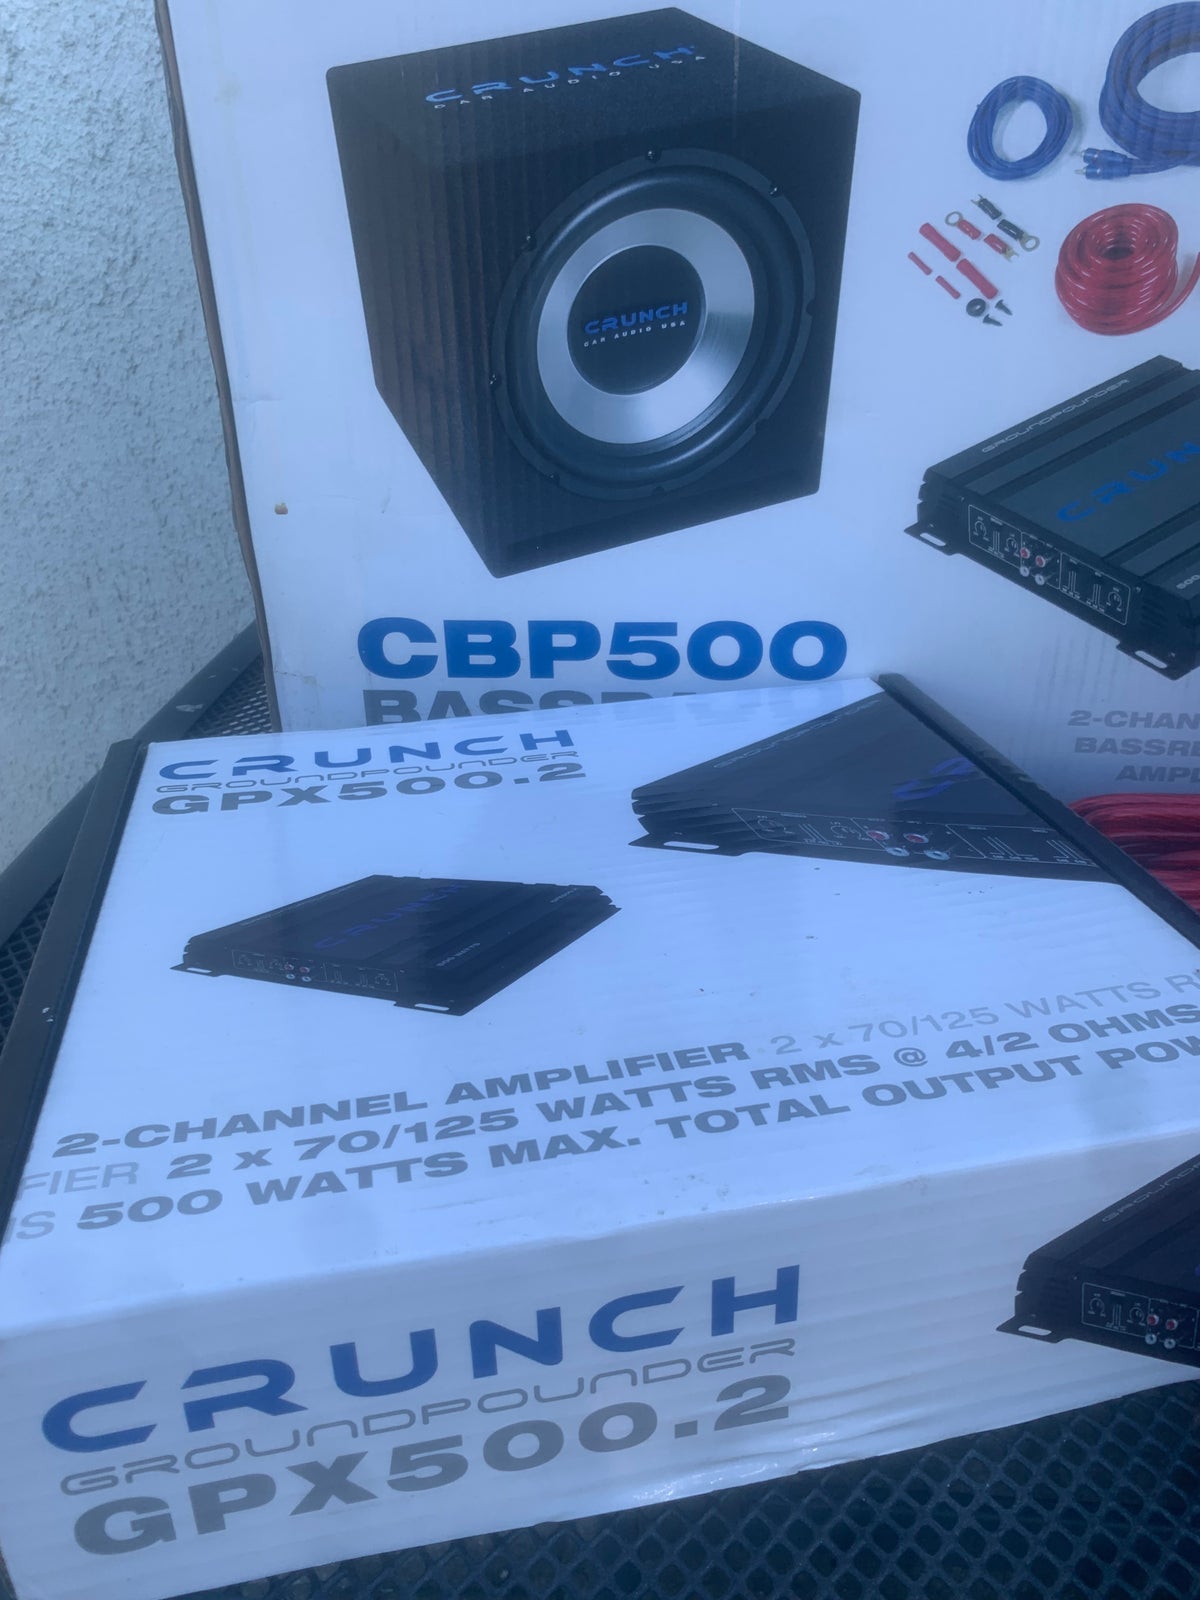 Crunch CPB 500., Subwoofer